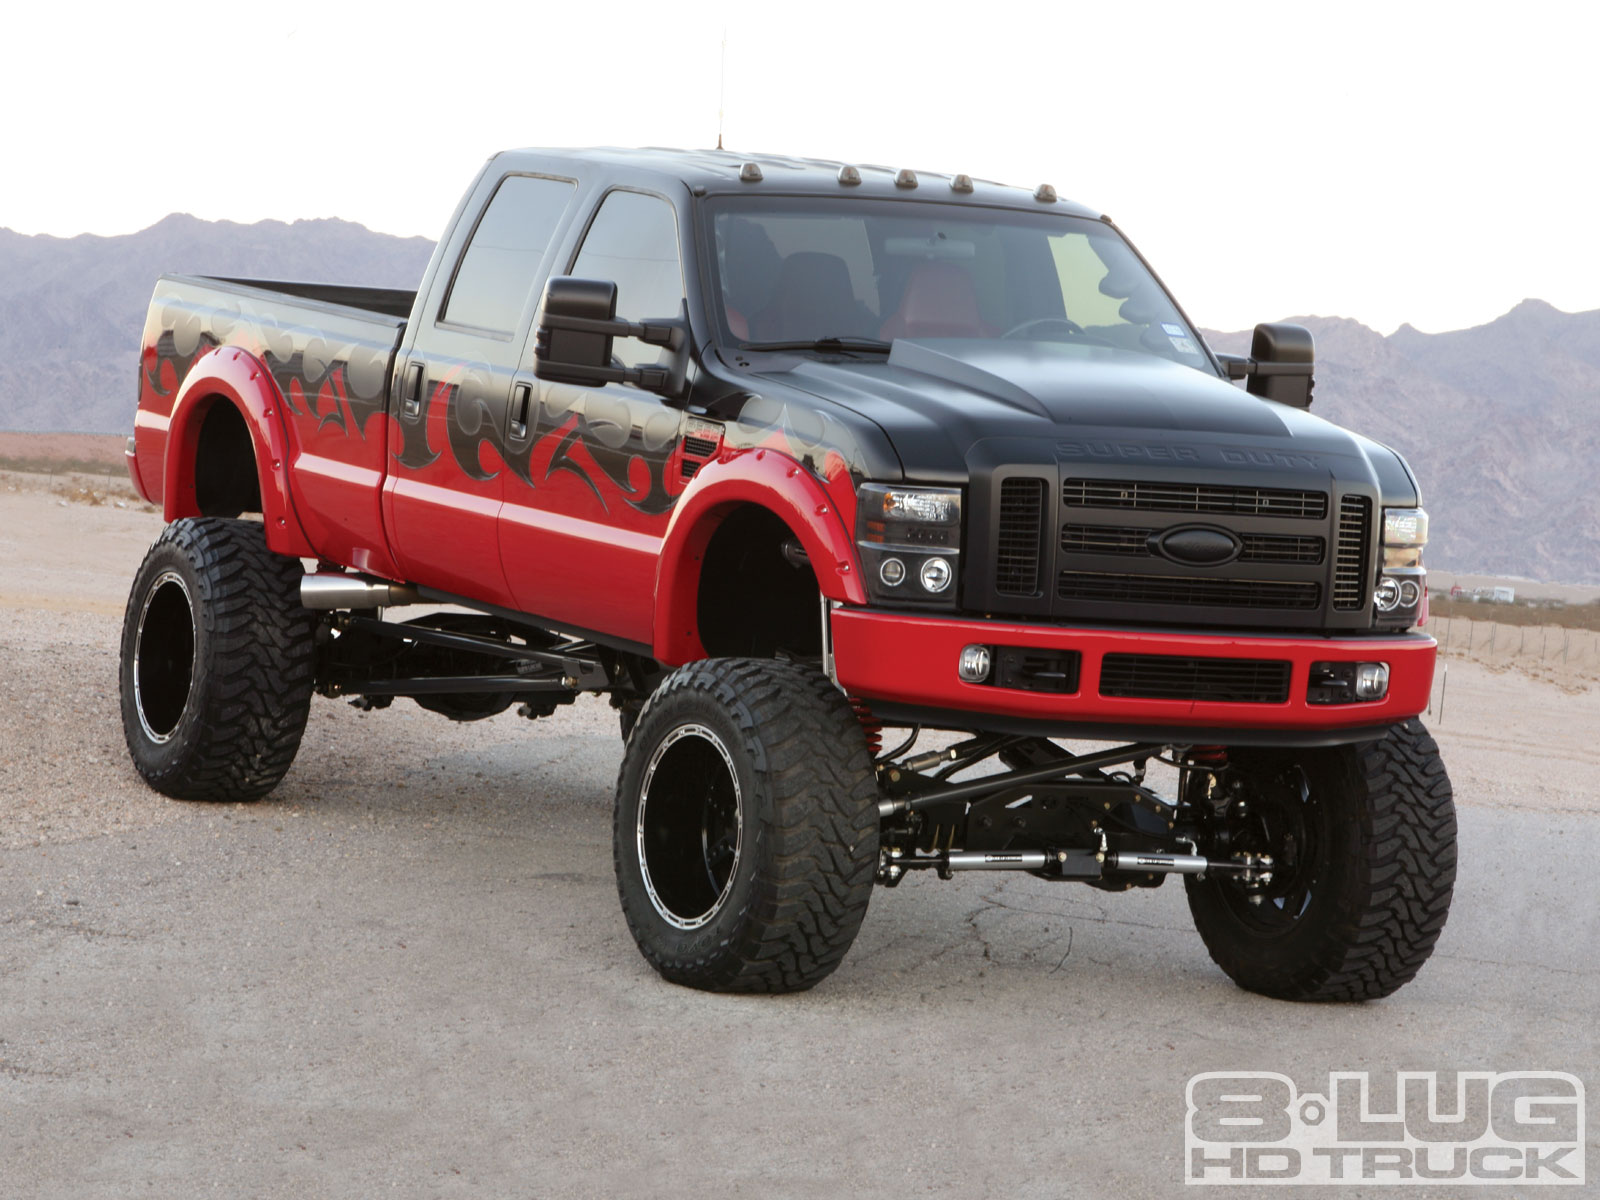 Vehicles Ford Super Duty HD Wallpaper | Background Image